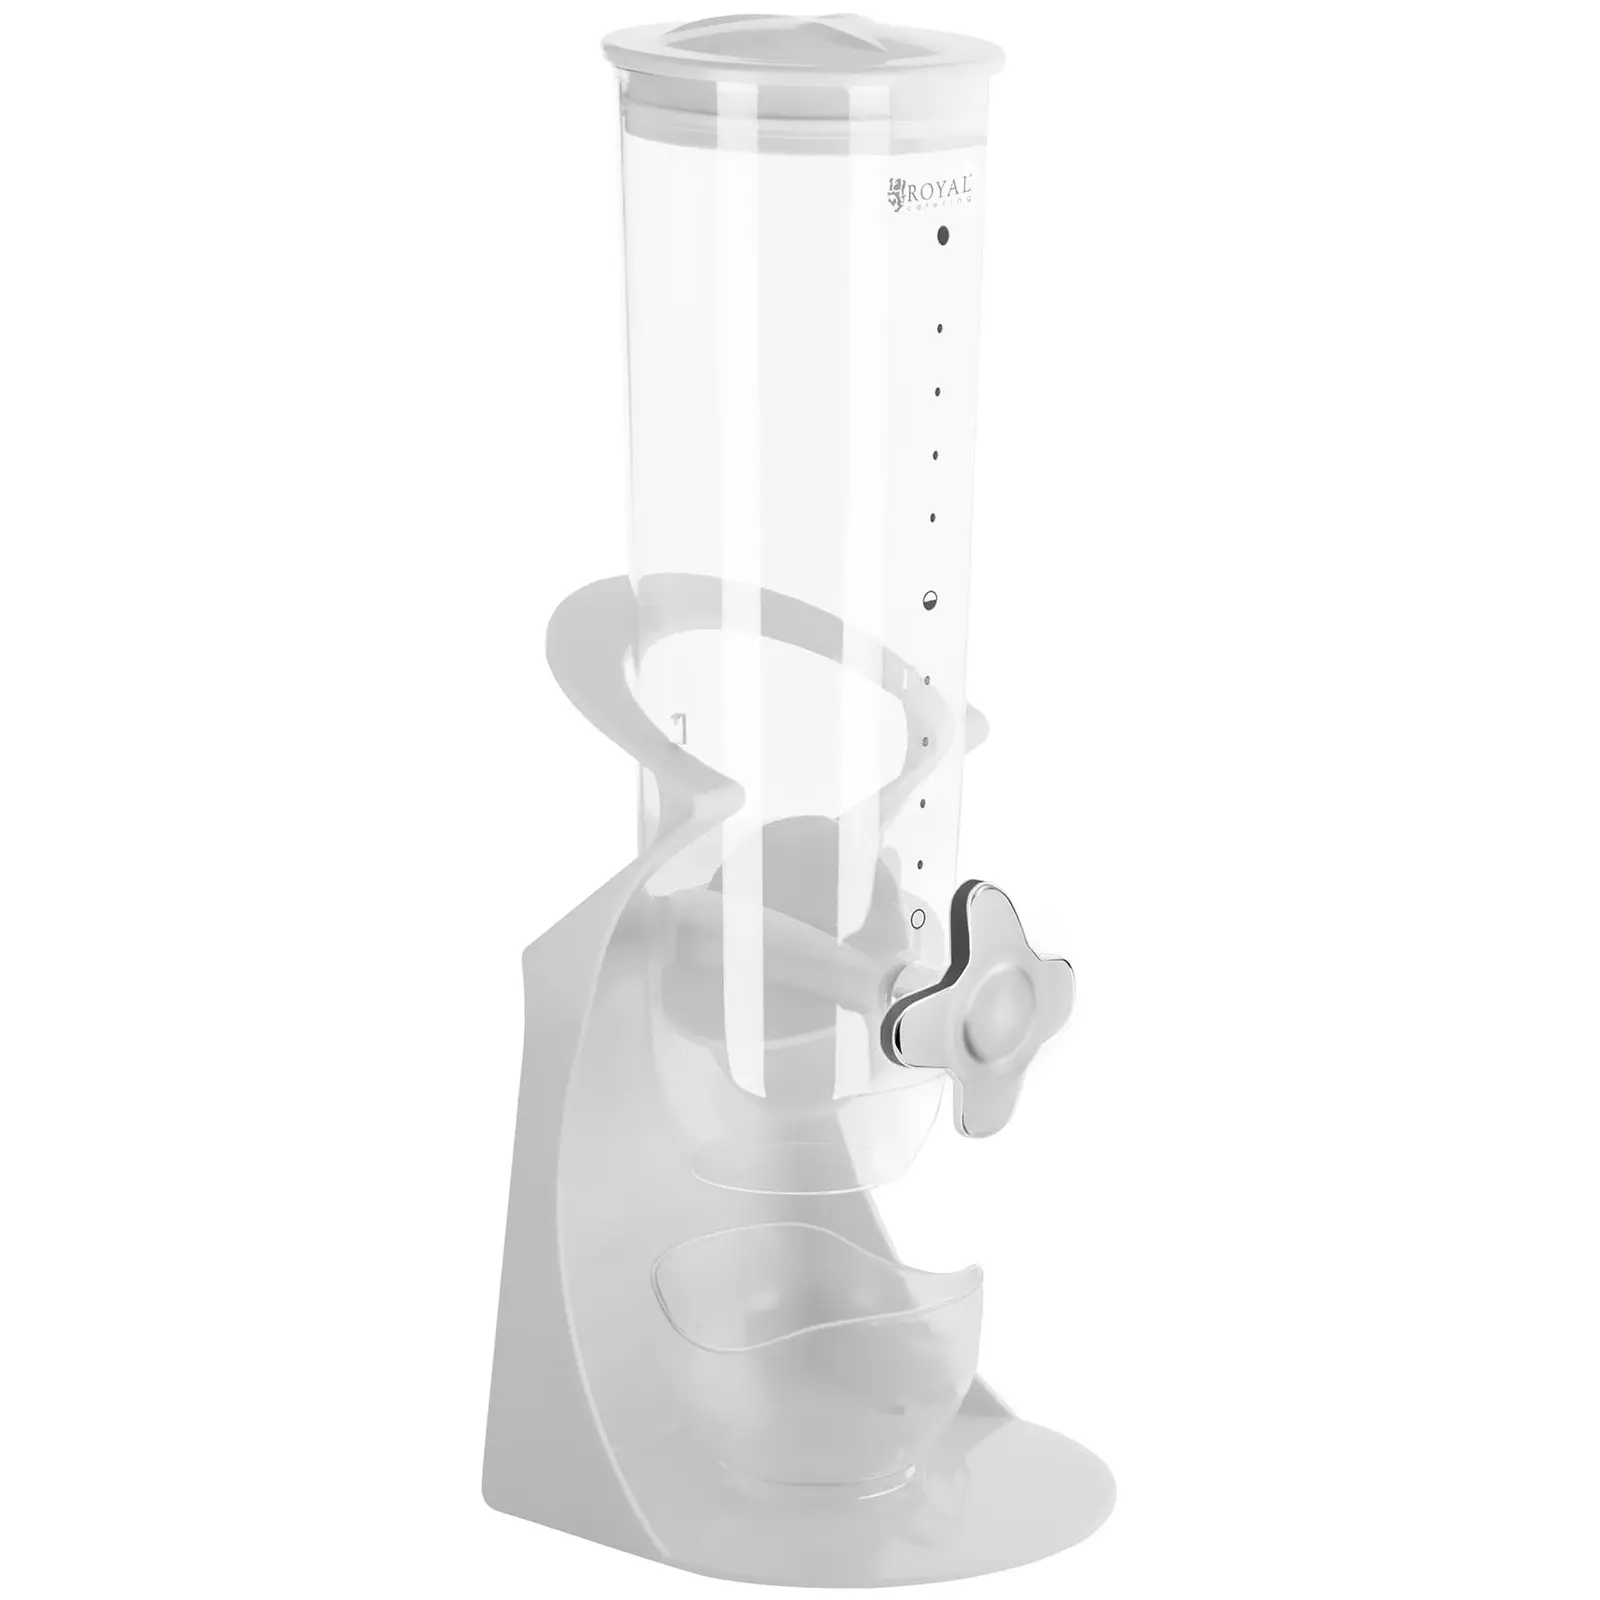 Cereal Dispenser 1,5 L - 1 containers